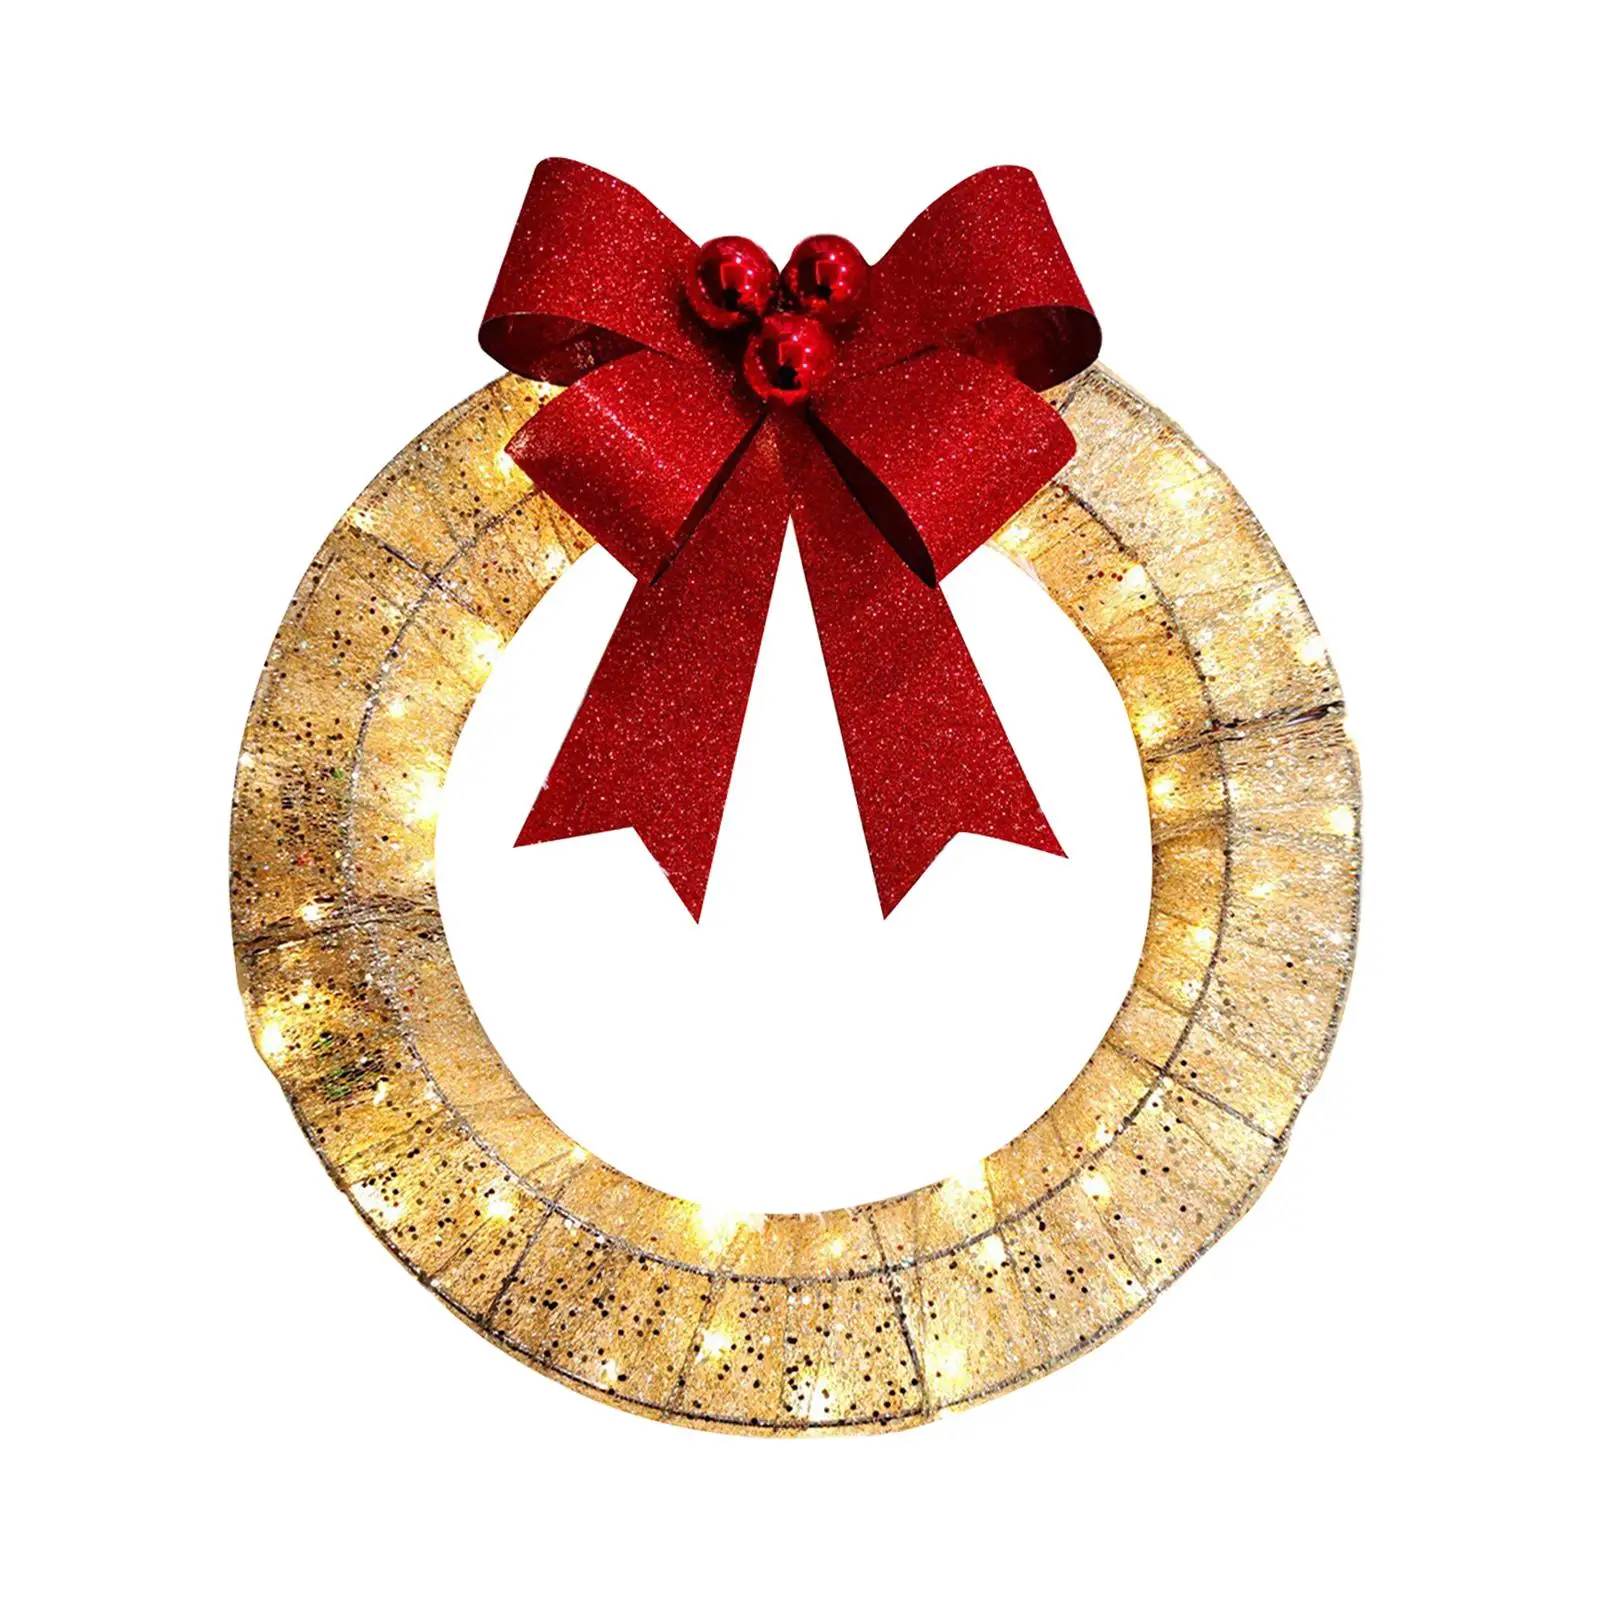 50cm Lighted Christmas Wreath Garland Door Flower Wreath Holiday Wreath for Front Door Festival Holiday Decoration